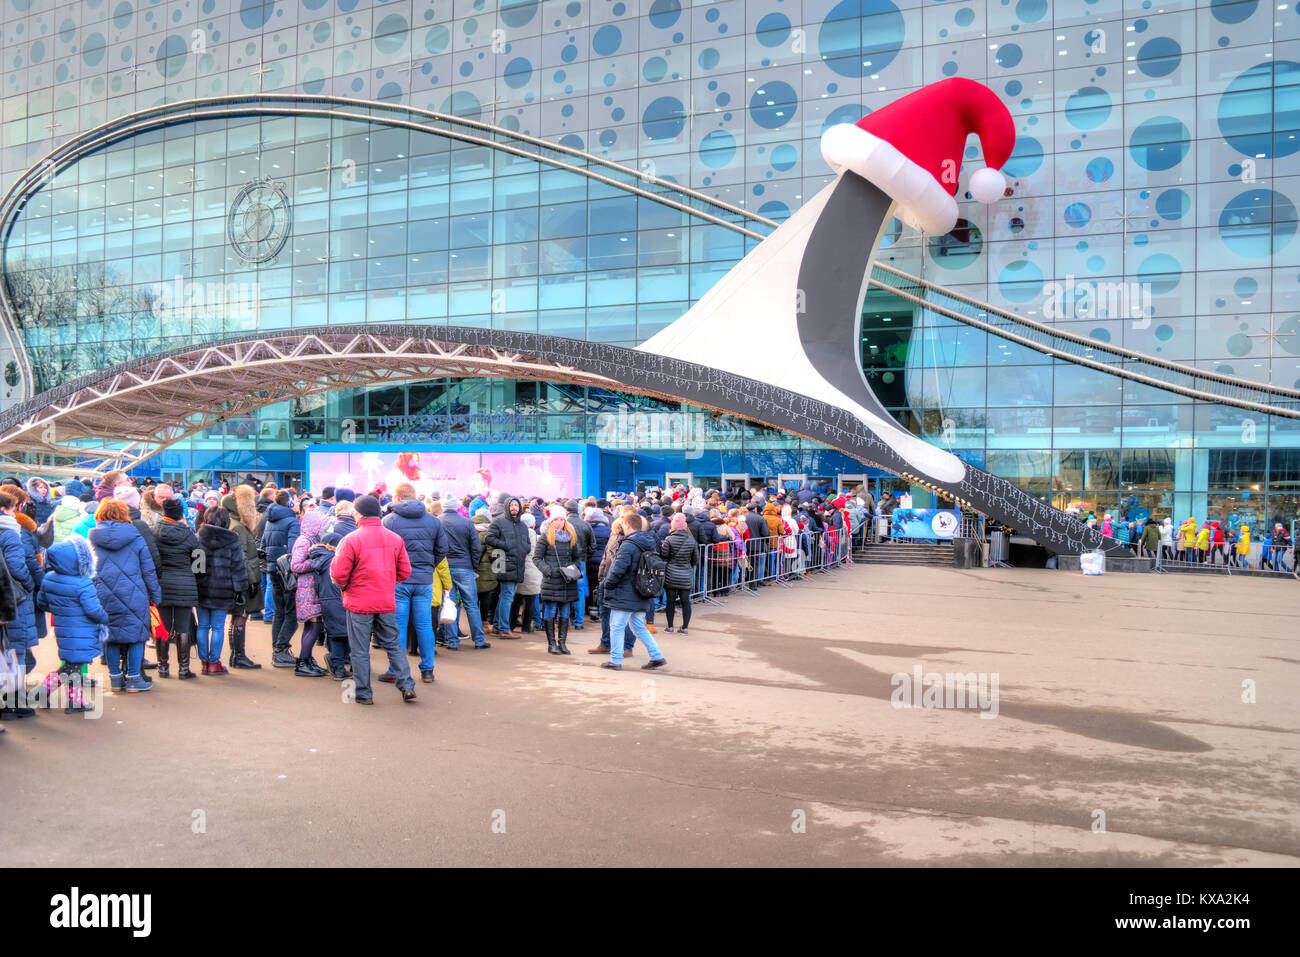 MOSCOW, RUSSIA - January 04.2018: People stand in huge queues in the Centre of Oceanography and marine biology Moskvarium. The current aquarium was bu Stock Photo